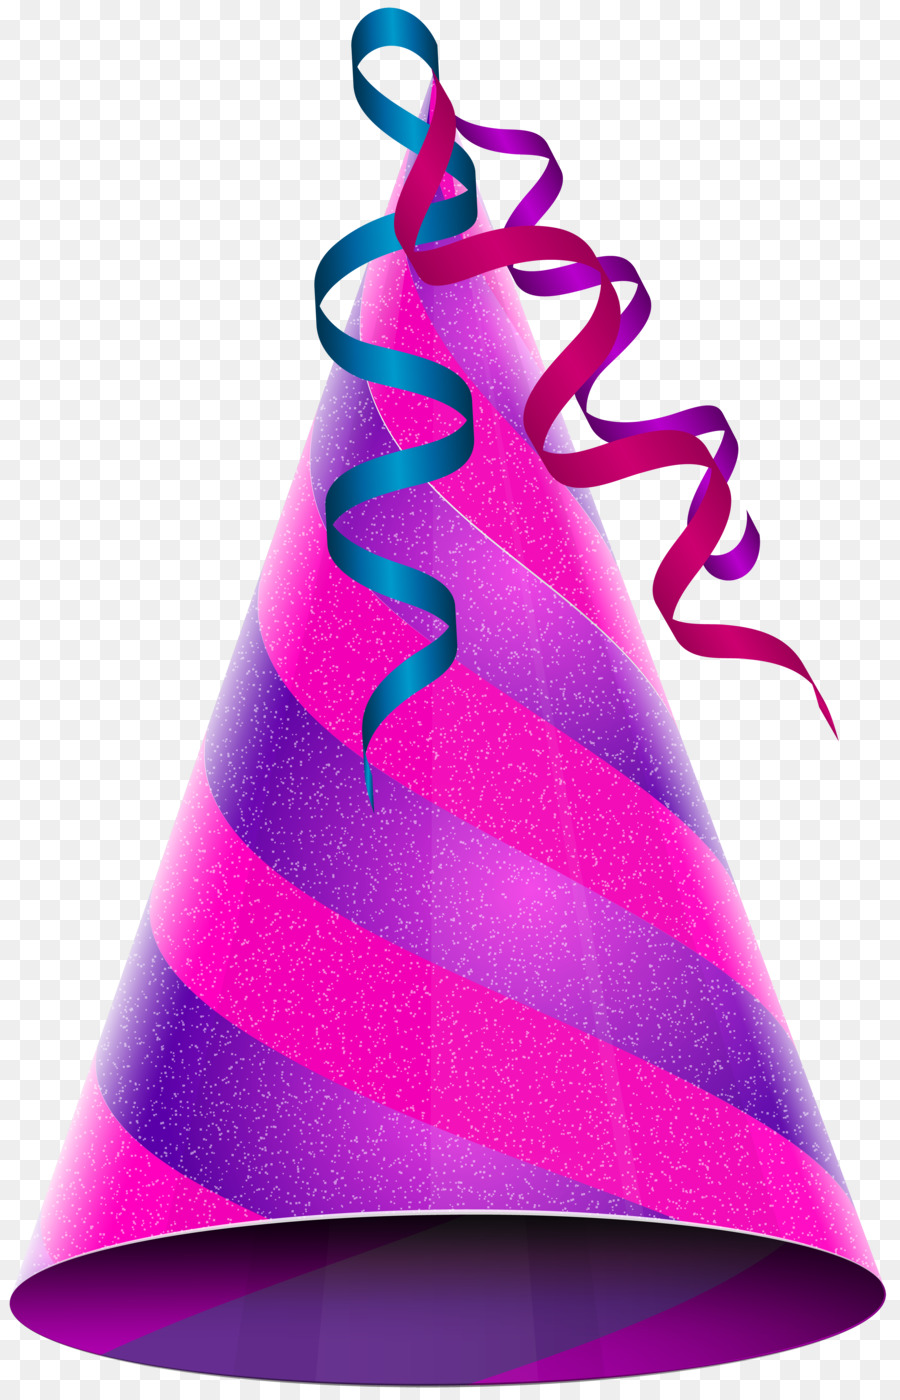 Birthday cake Party hat Clip art - Birthday Party png download - 5167*8000 - Free Transparent Birthday Cake png Download.